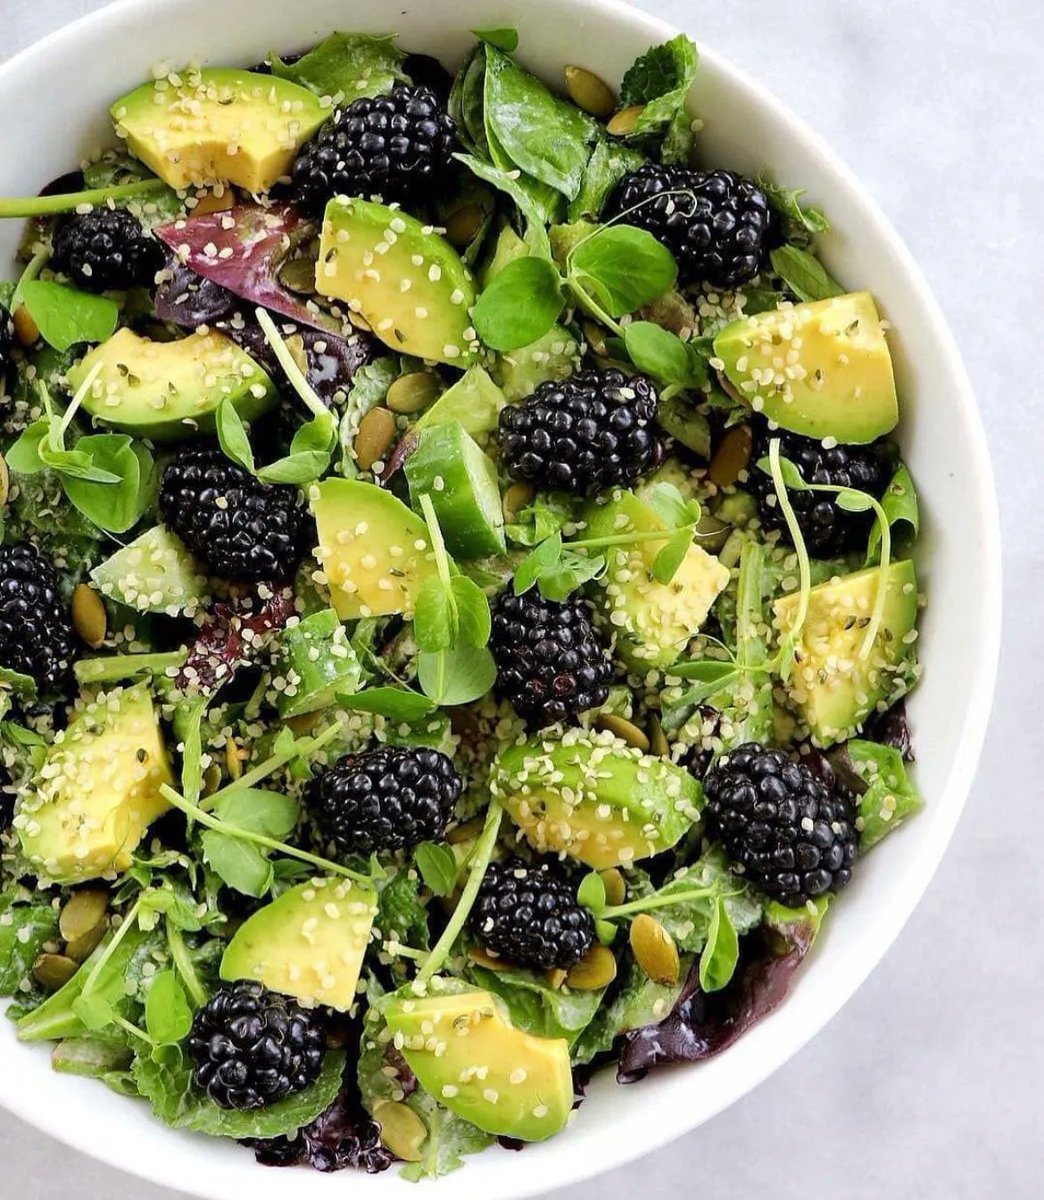 Light Buddha Bowl

IG: Veganrevolution.ig recipe:

This bowl is made with mixed greens, cucumbers, blackberries, avocado, pumpkin seeds, micro-greens and a tahini dressing. 

Enjoy!